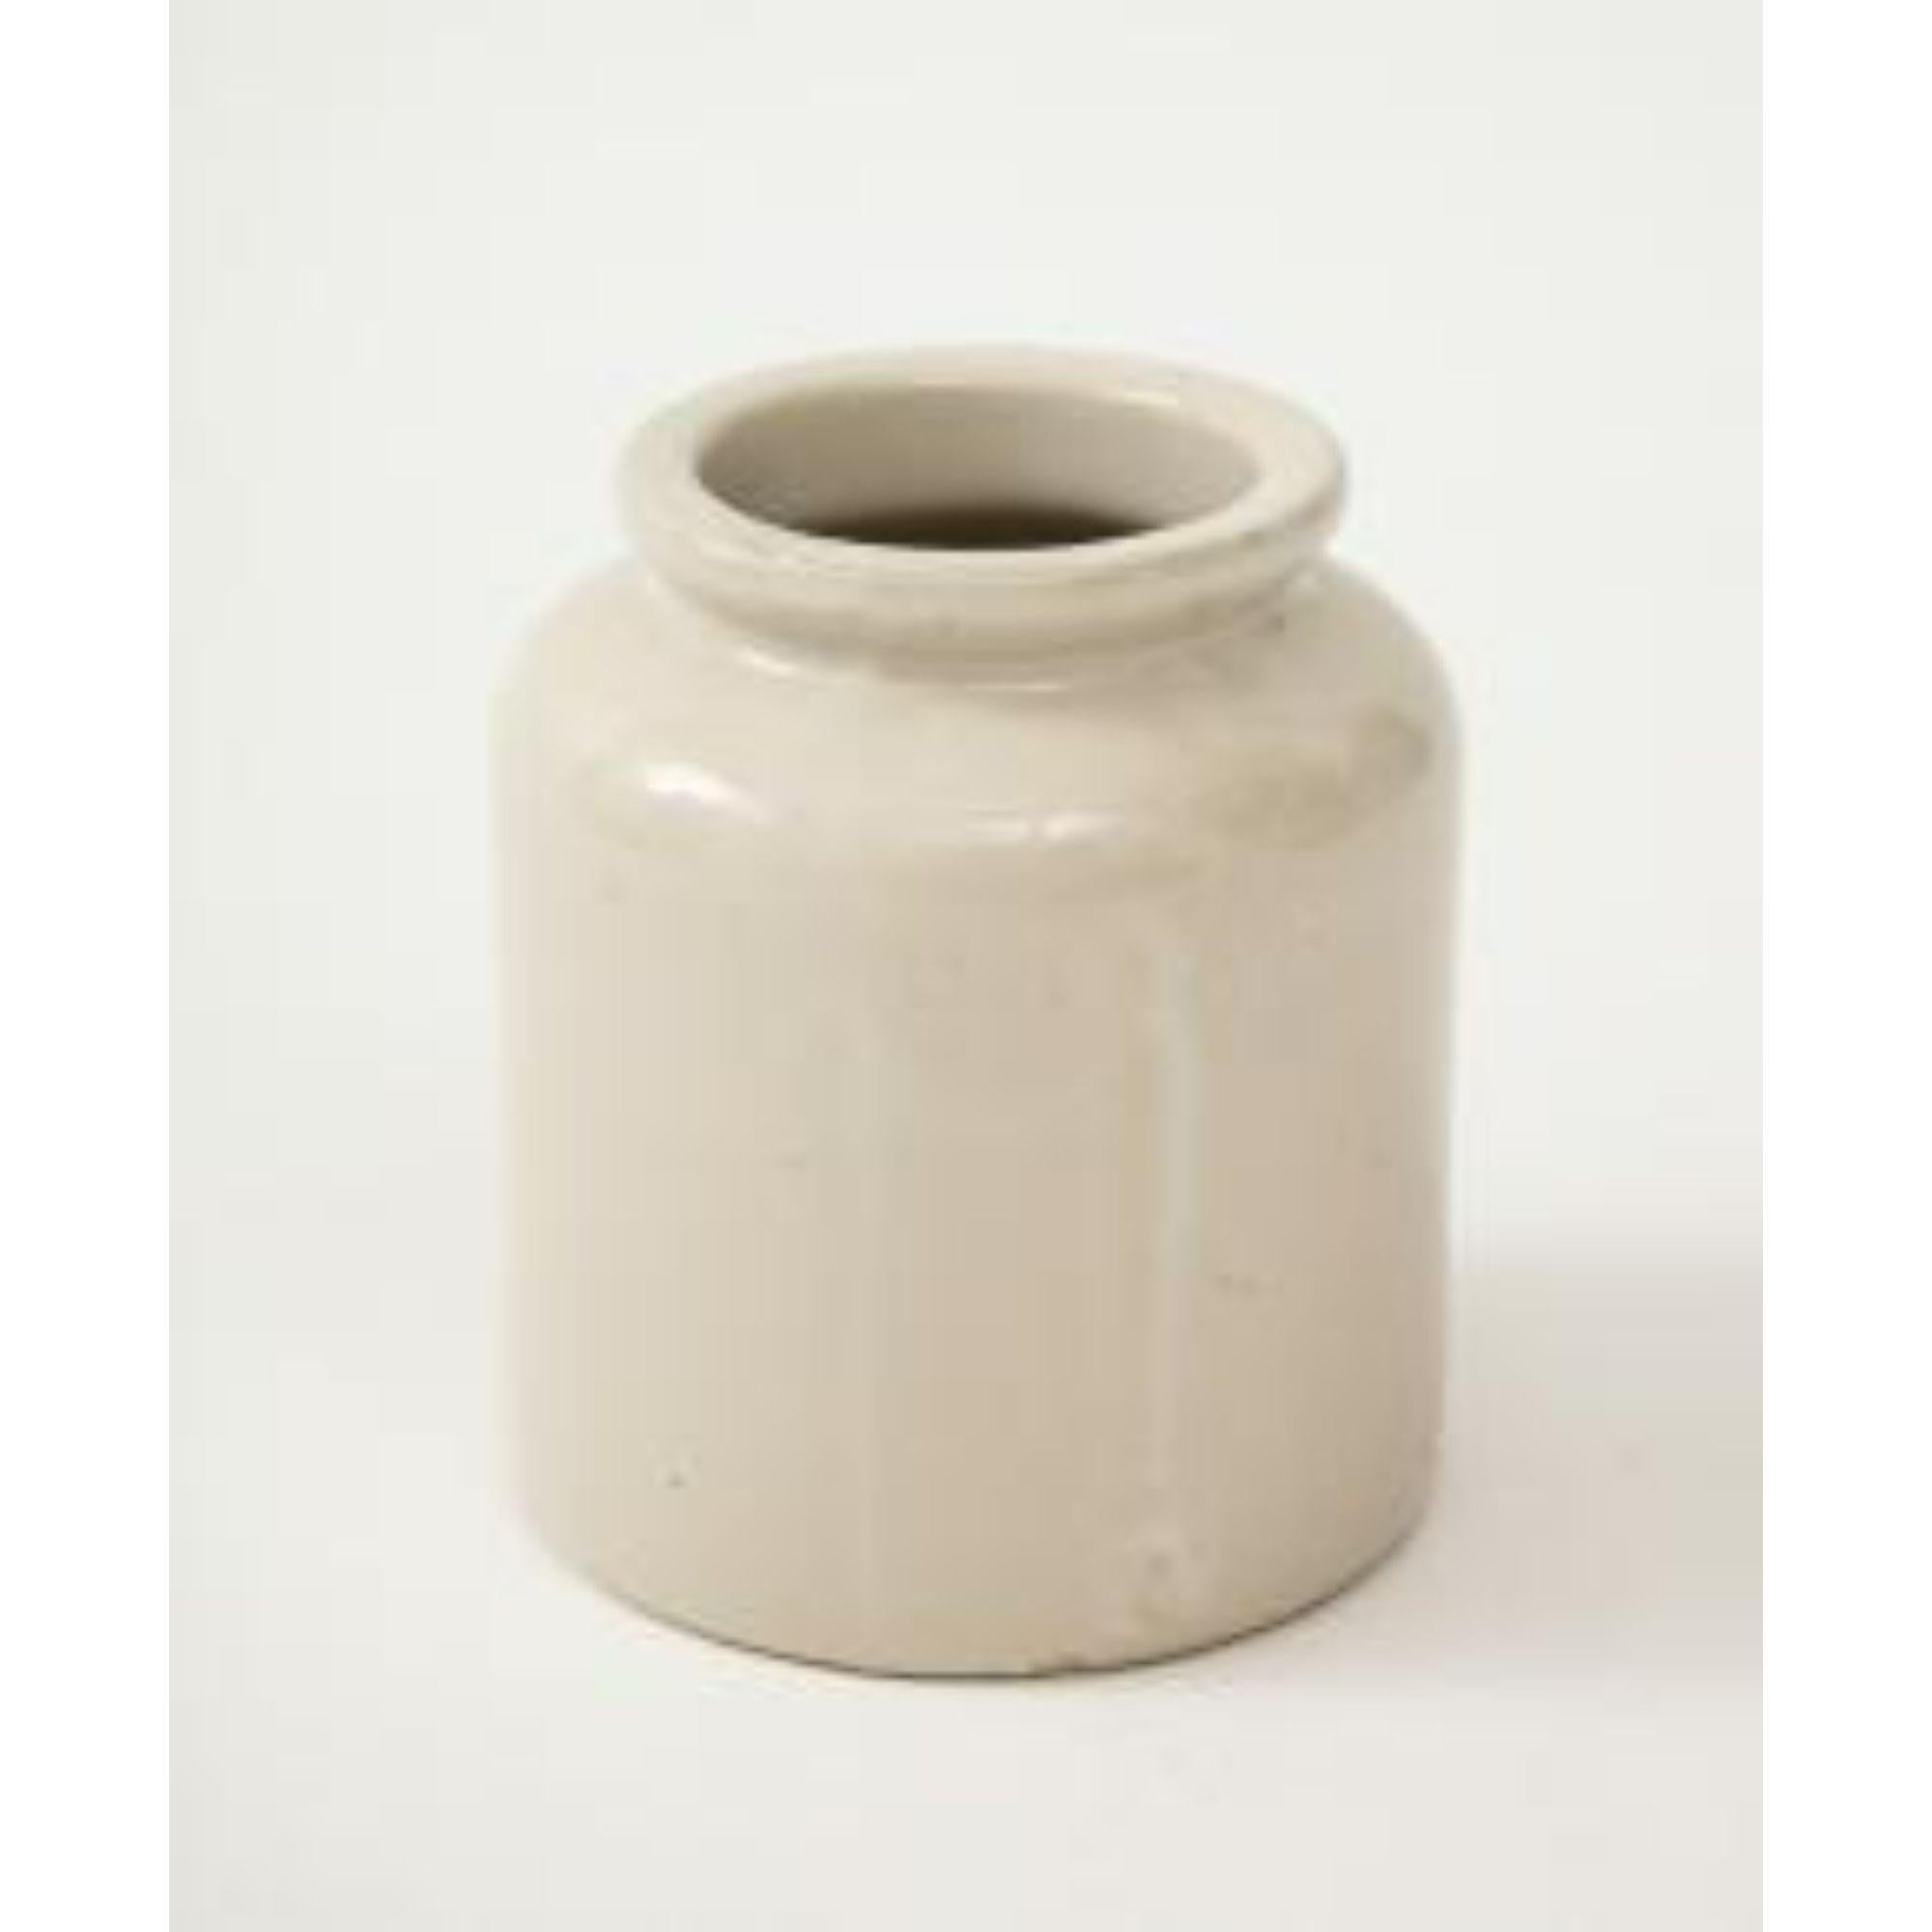 Hand-painted in a cream tone with a light glaze that gives off a soft, understated sheen.

